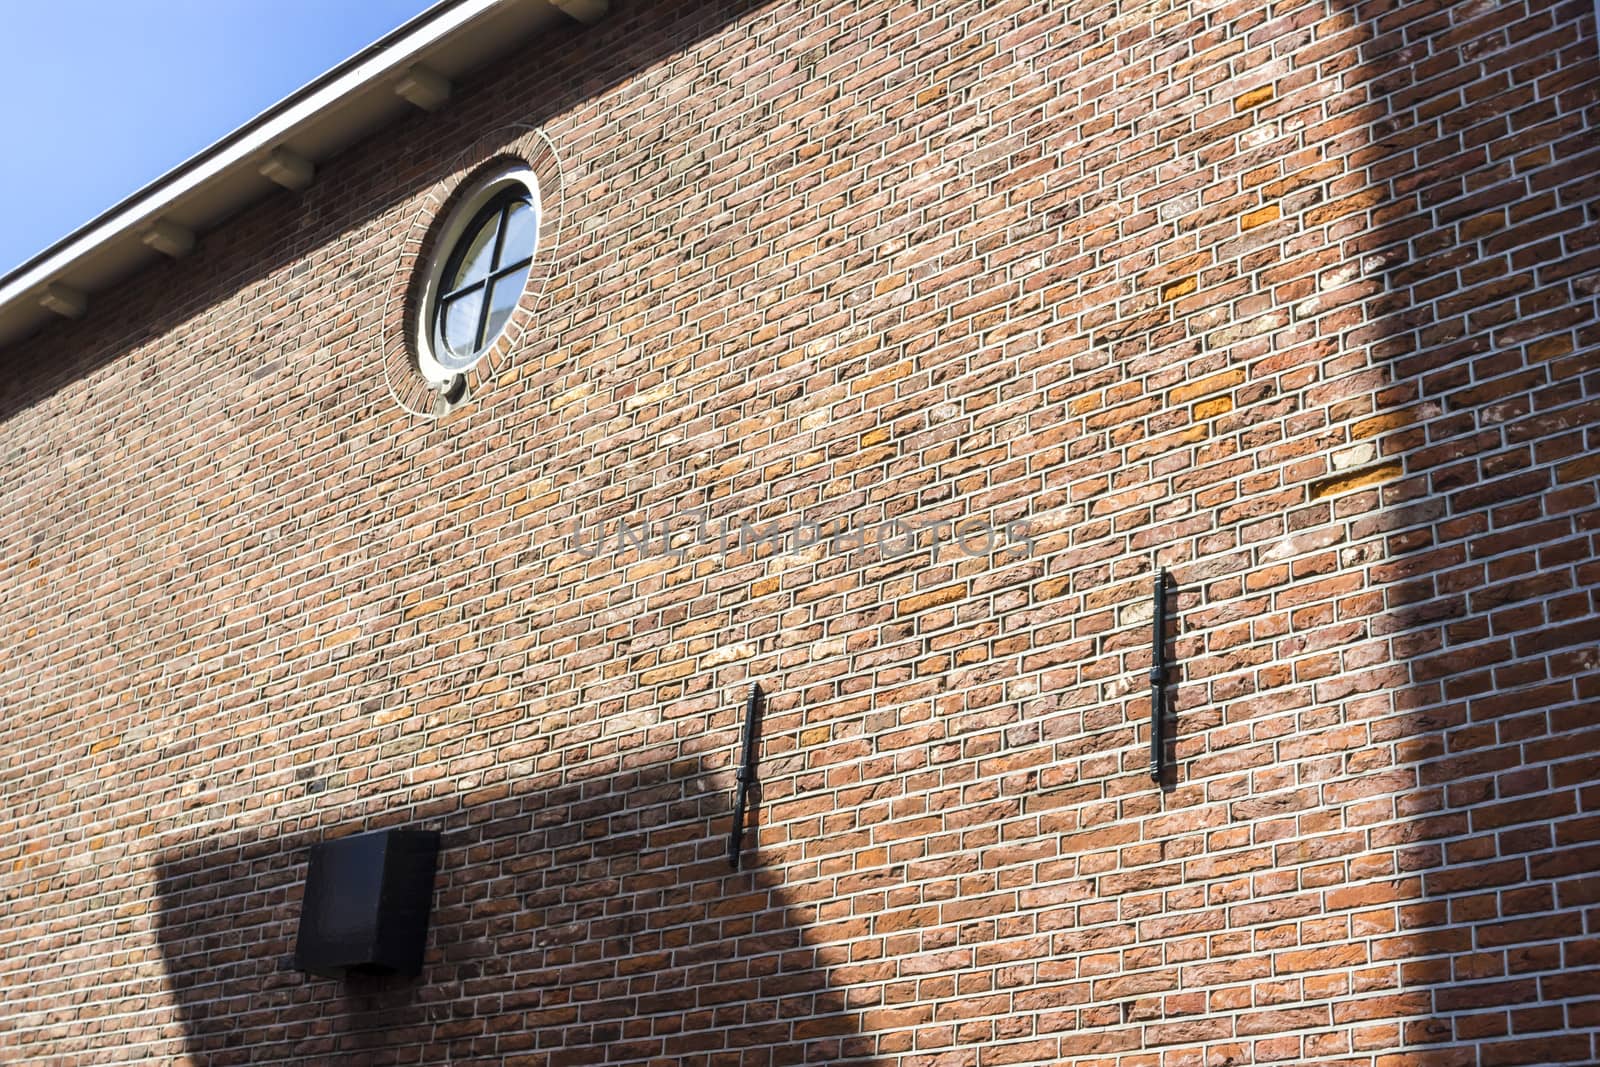 Round window on brick wall with clear blue sky, Alkmaar, the Netherlands